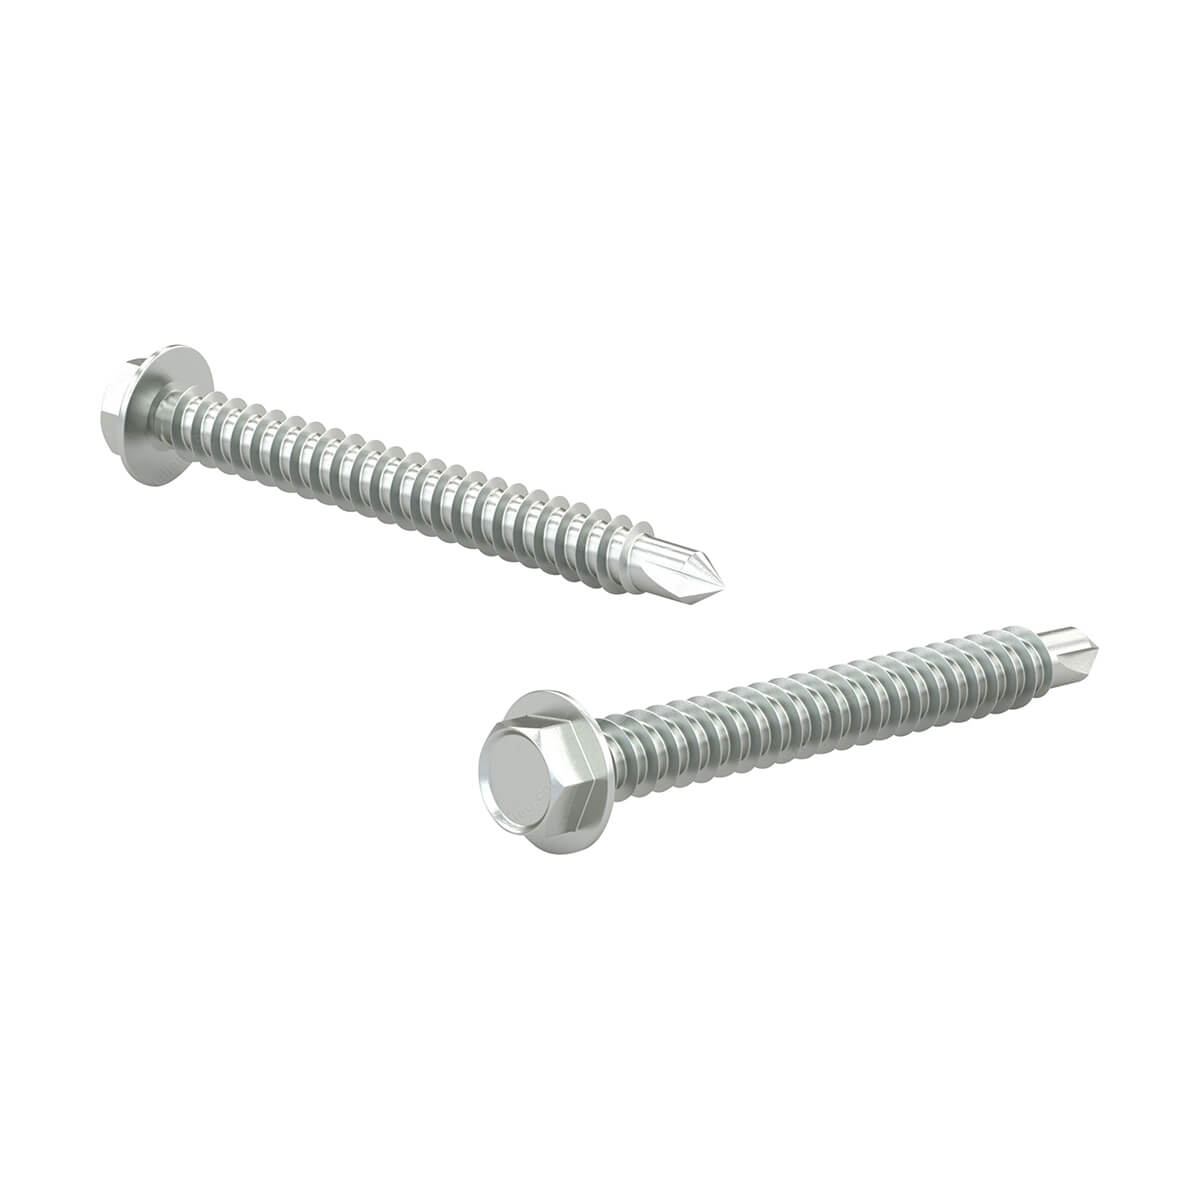 Hex with Washer Self-Drilling Screws - #14 X 3-in - 100 / Box